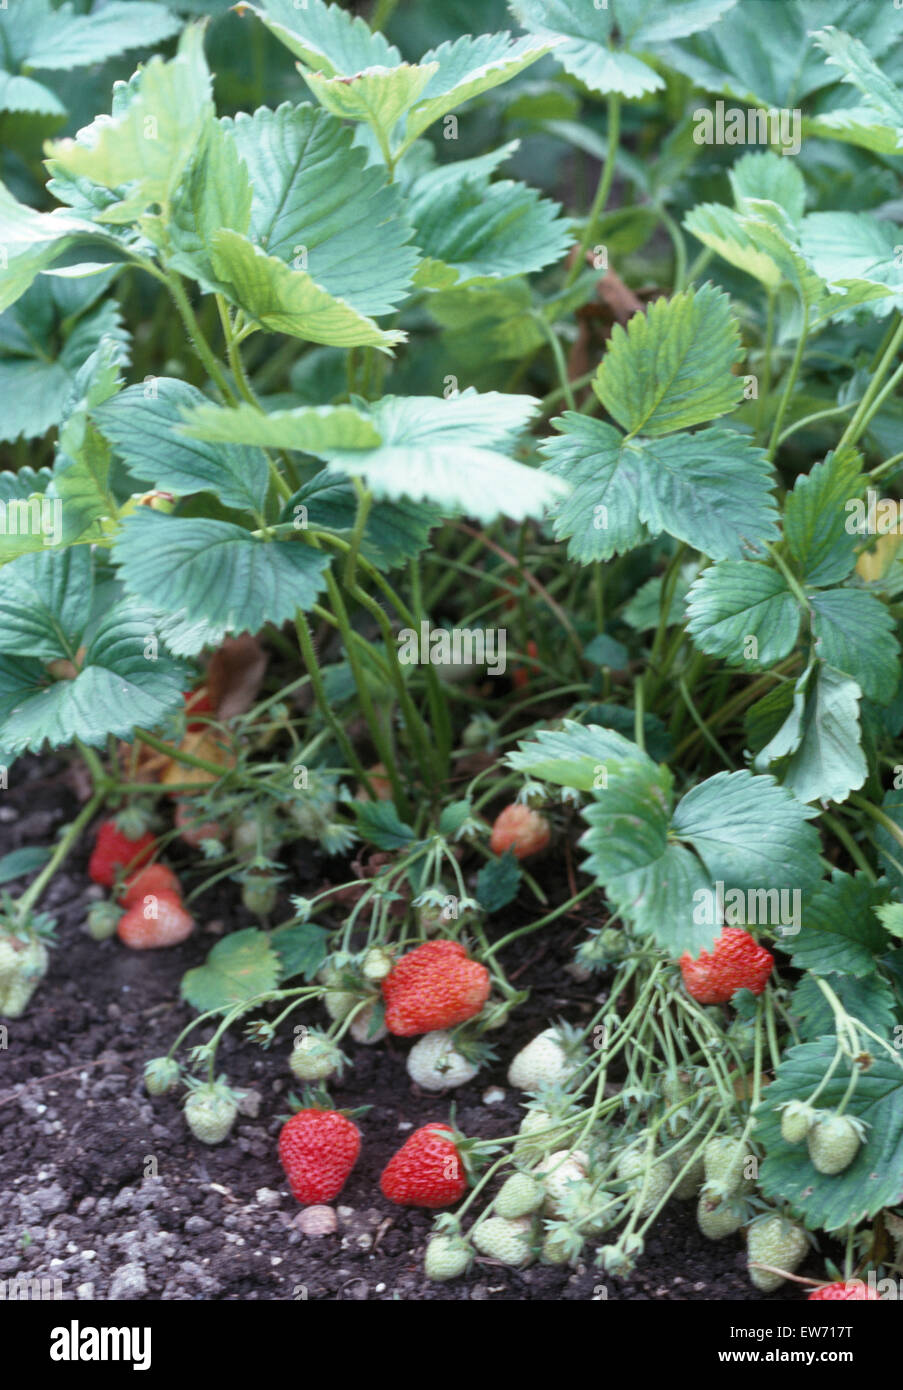 Close-up of ripening strawberries in a vegetable garden Stock Photo